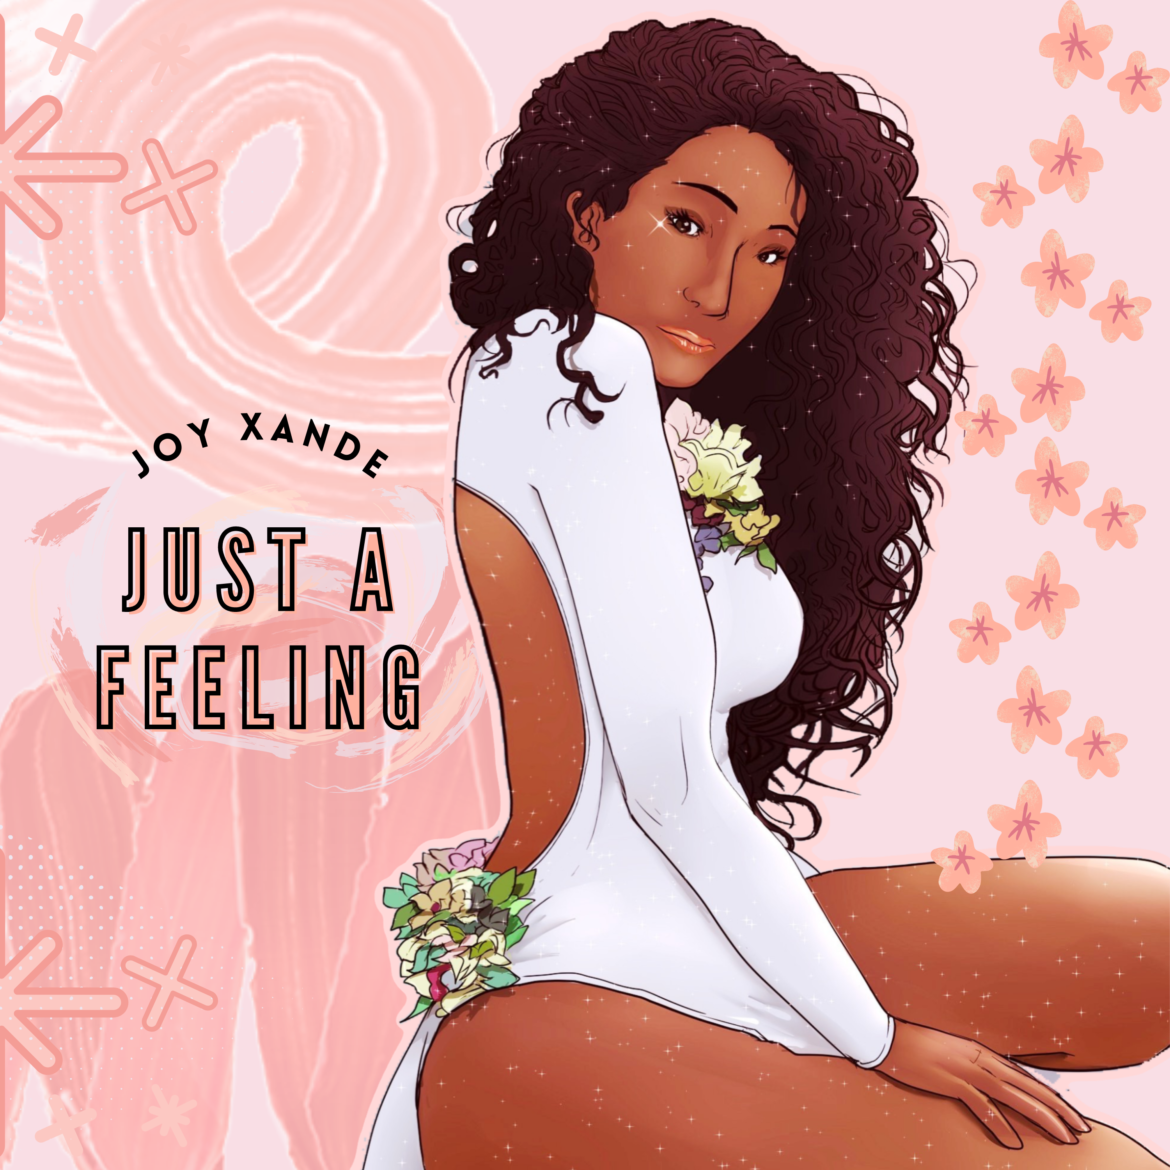 Joy Xande’s Single ‘Just A Feeling’ Wrapped 2021 With Style